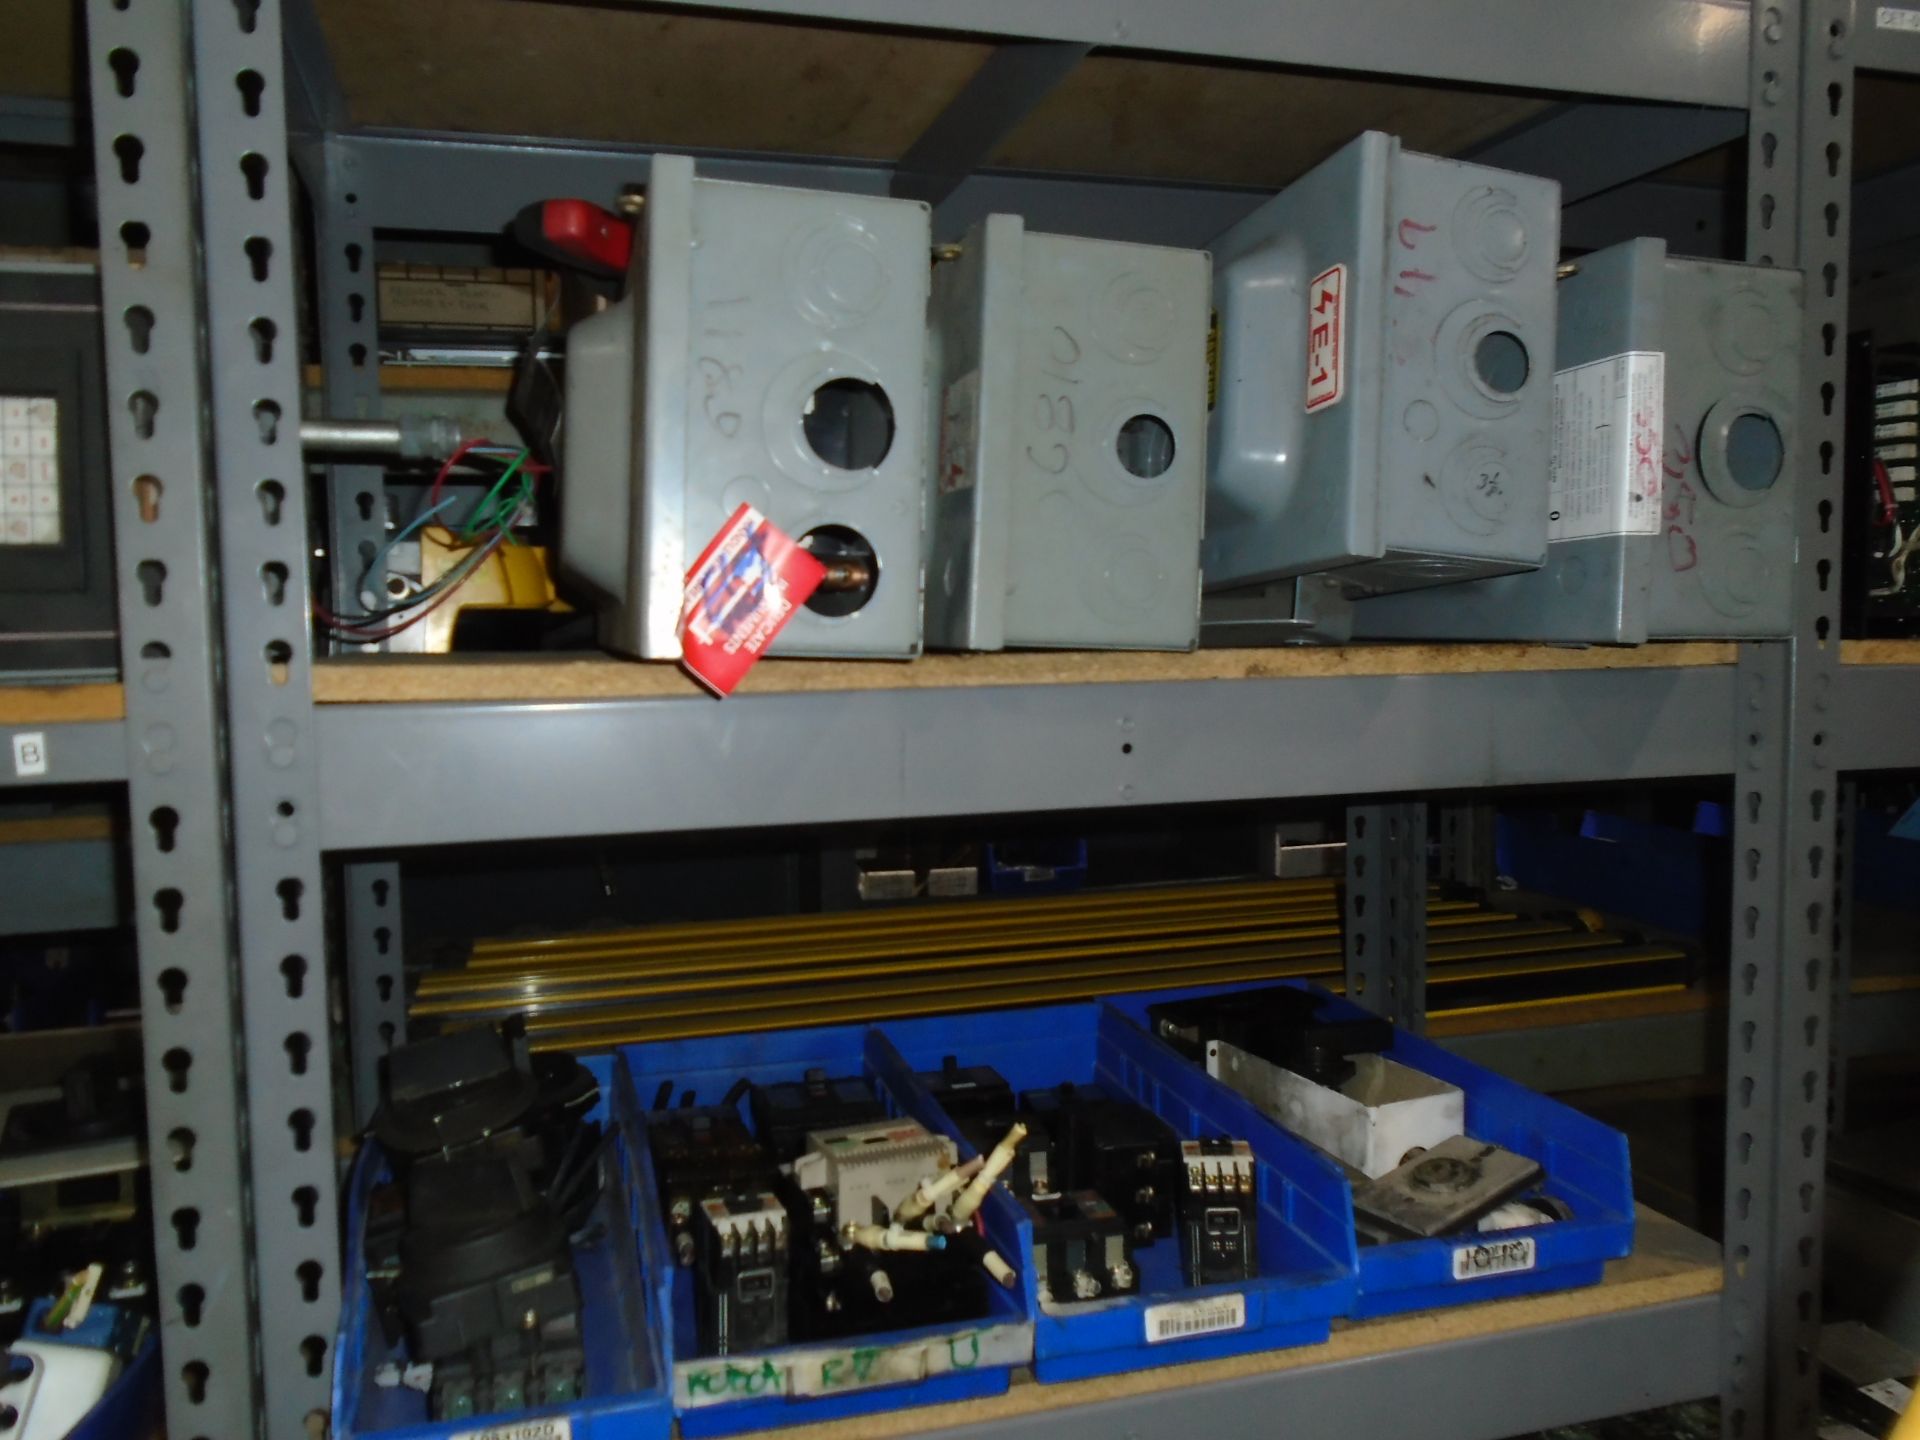 Electrical Components, Staters, Timers, Switches, Disconnecting Boxes For CNC Lathe & Mills - Image 3 of 12